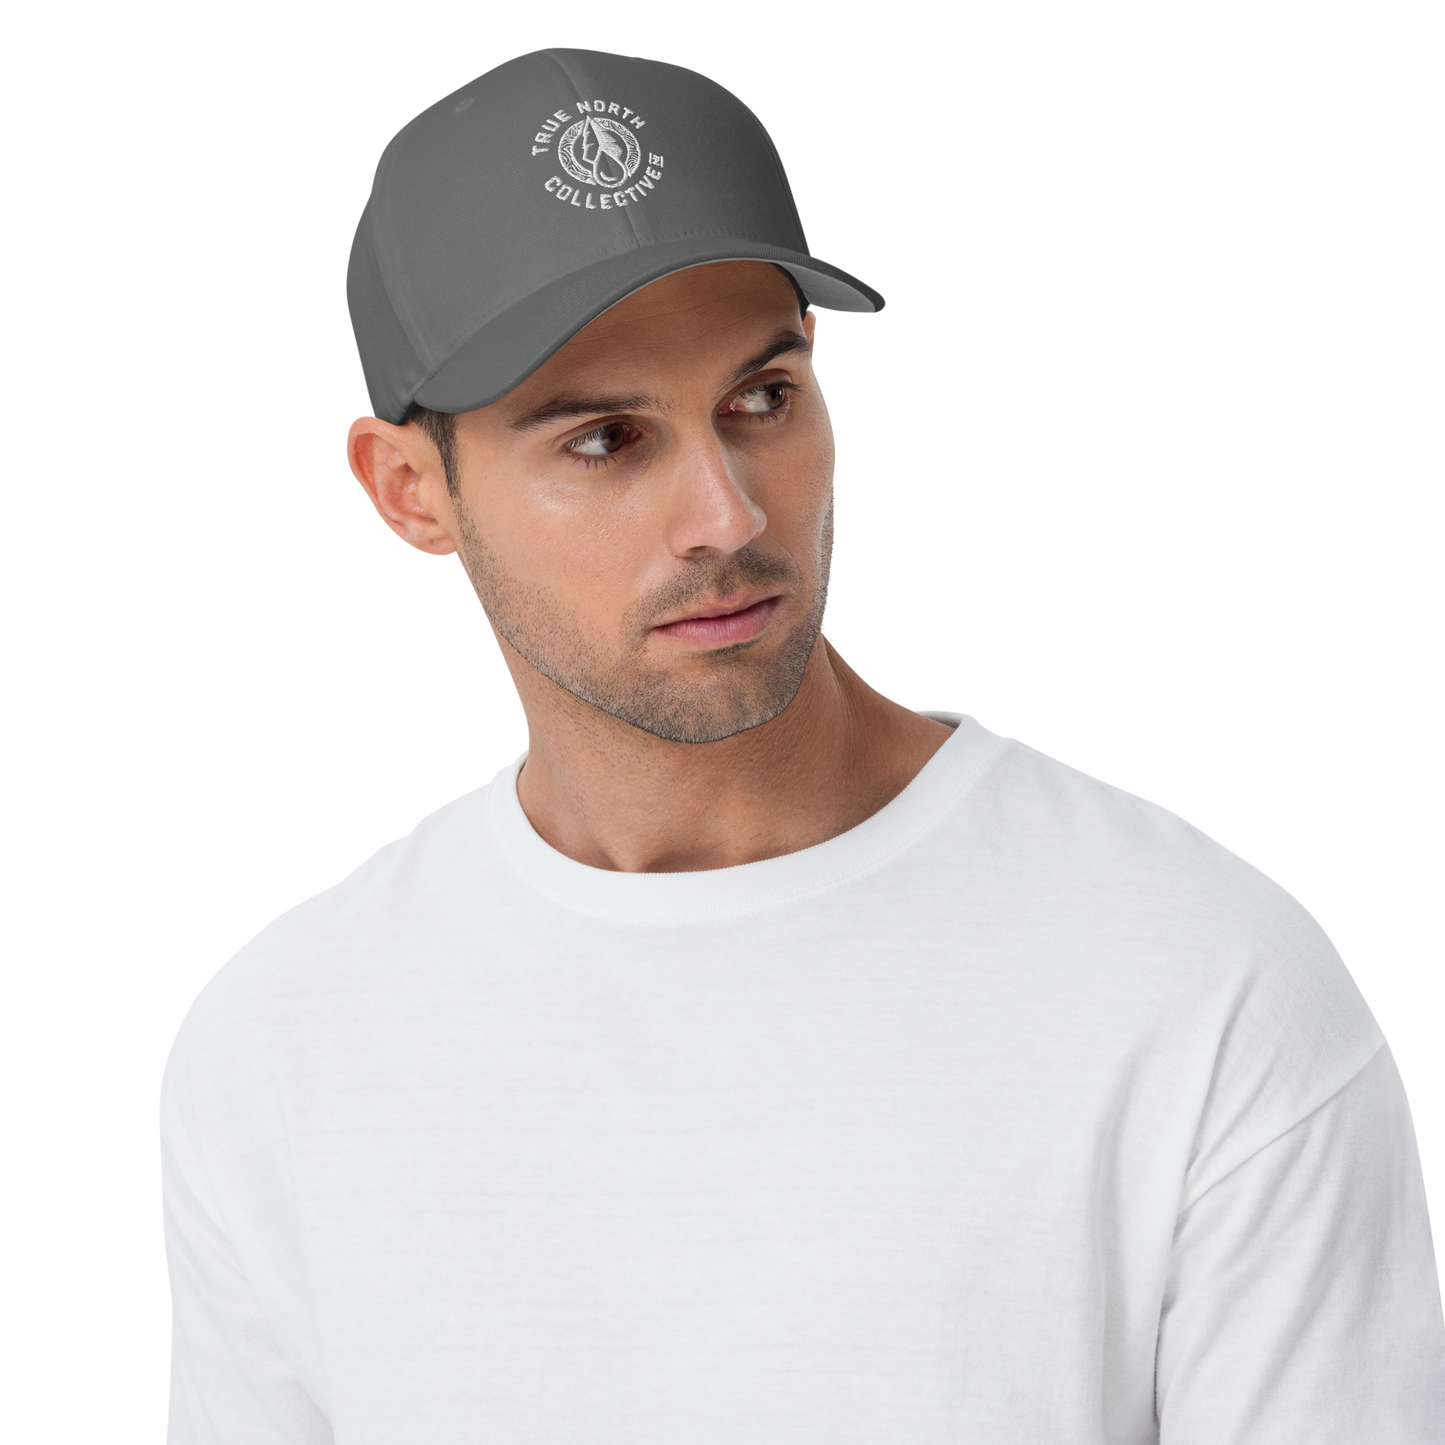 True North Collective Embroidered Flex Fit Hat